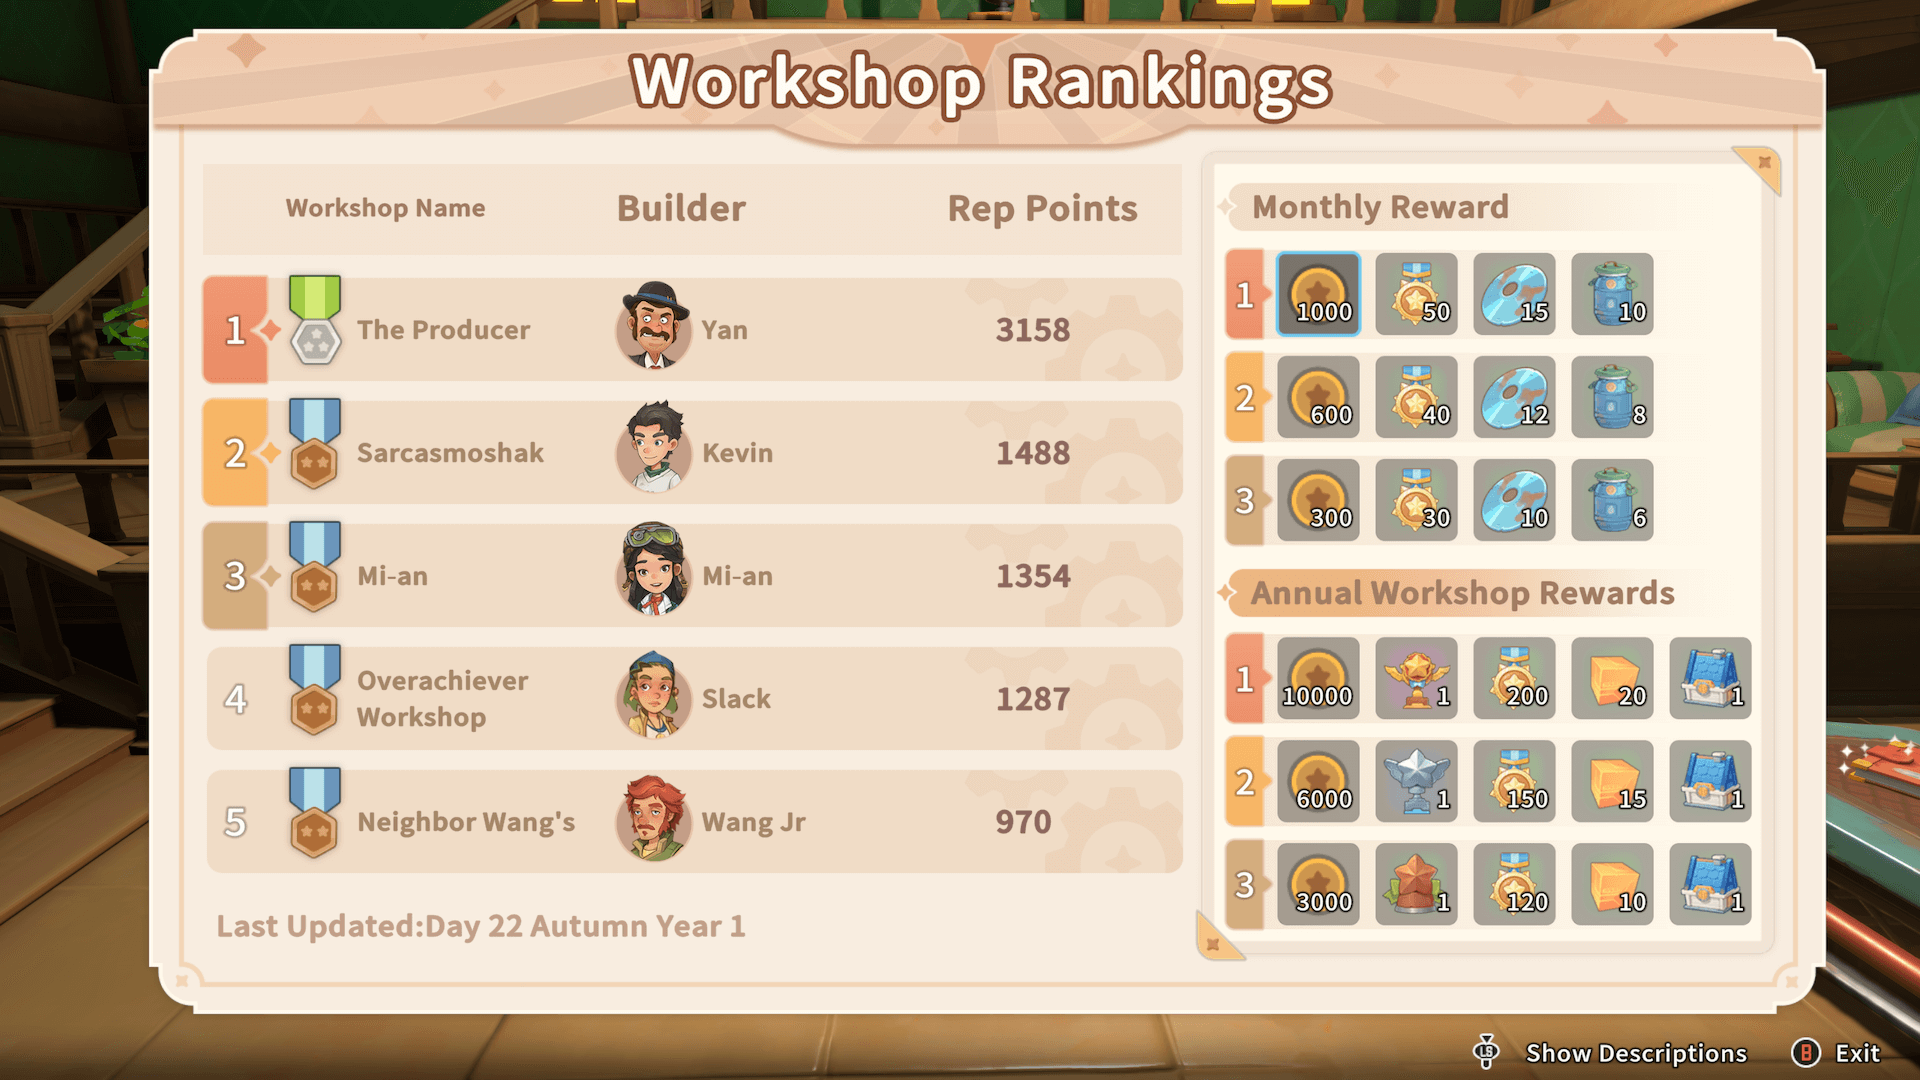 Workshop rankings. A list of the 5 workshops. Yan (I don't like yan) is at the top and I am in second place. There is a list of rewards for annual finish positions and monthly finish positions. Looks like I might be getting something this month.